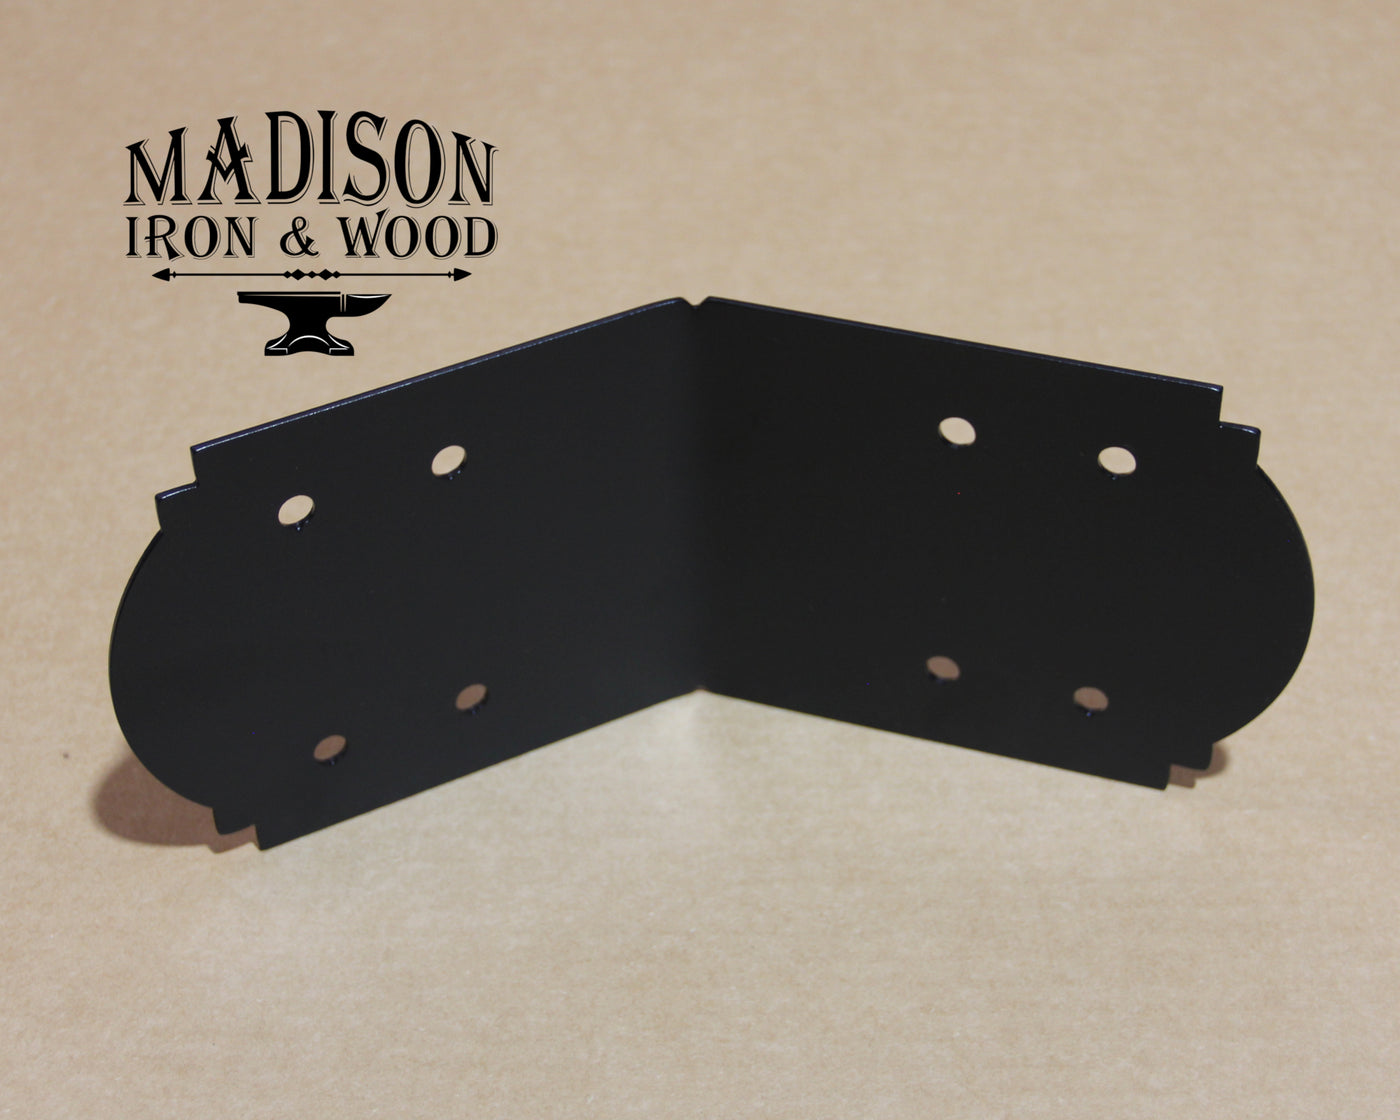 45 Degree / 135 Degree Bracket for 6" Post - Madison Iron and Wood - Brackets - metal outdoor decor - Steel deocrations - american made products - veteran owned business products - fencing decorations - fencing supplies - custom wall decorations - personalized wall signs - steel - decorative post caps - steel post caps - metal post caps - brackets - structural brackets - home improvement - easter - easter decorations - easter gift - easter yard decor